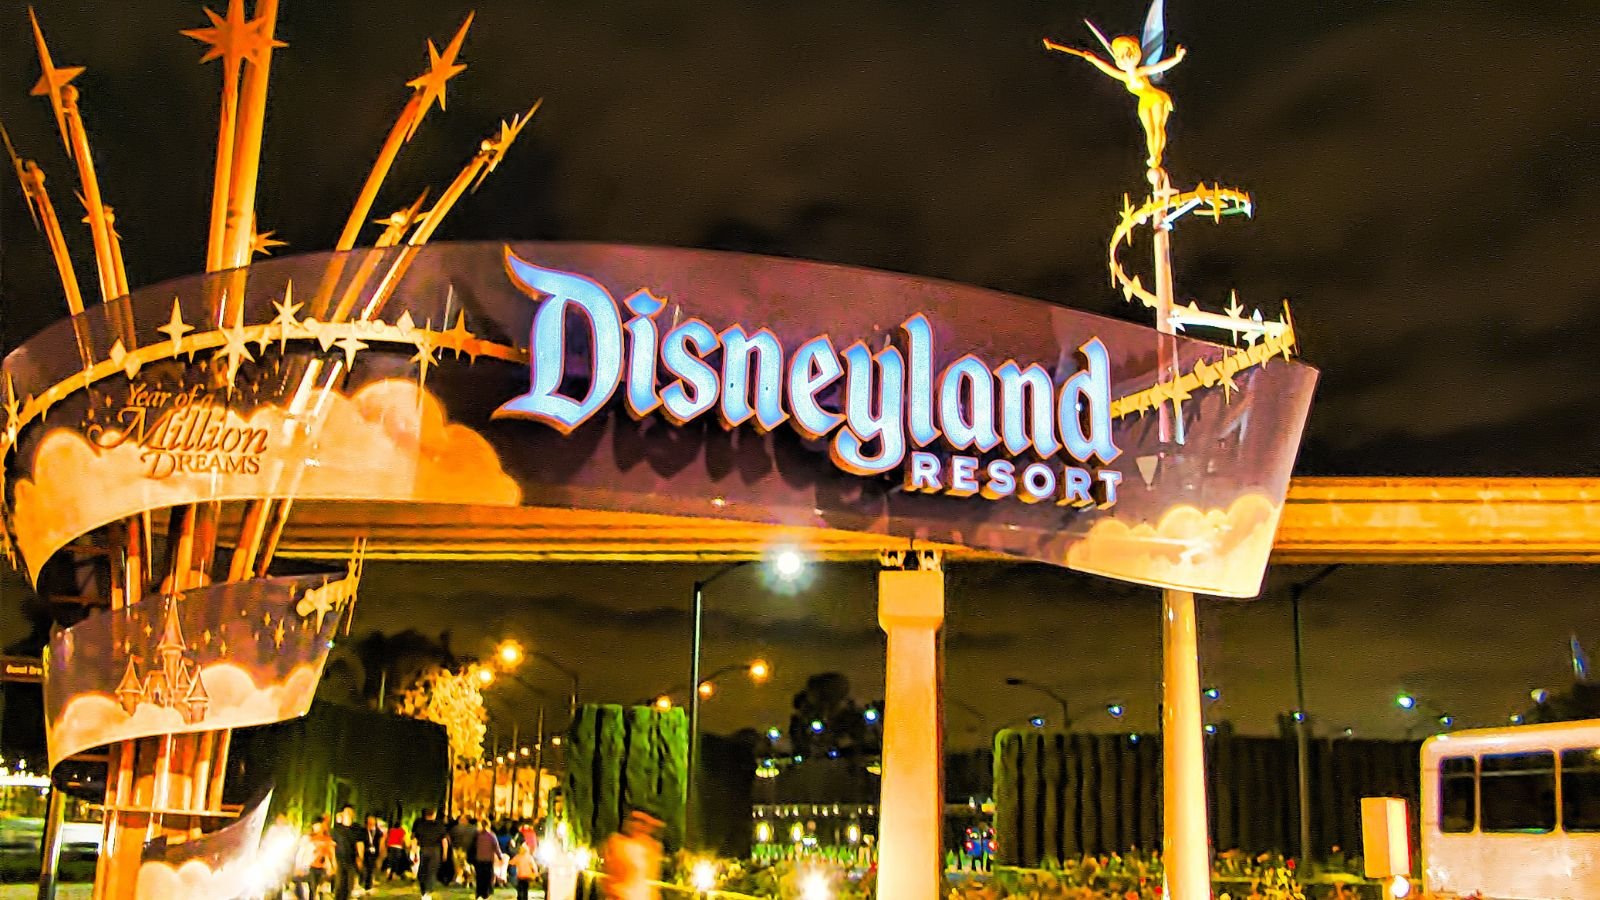 <p>Three resorts on Disneyland premises offer exquisite stays for families and friends. The park also offers multi-day offers to attract more visitors interested in the accommodation. Even the most basic rooms in any Disney property can cost hundreds of dollars. Around 47% of debtors have listed lodging as the reason for their debt.</p>